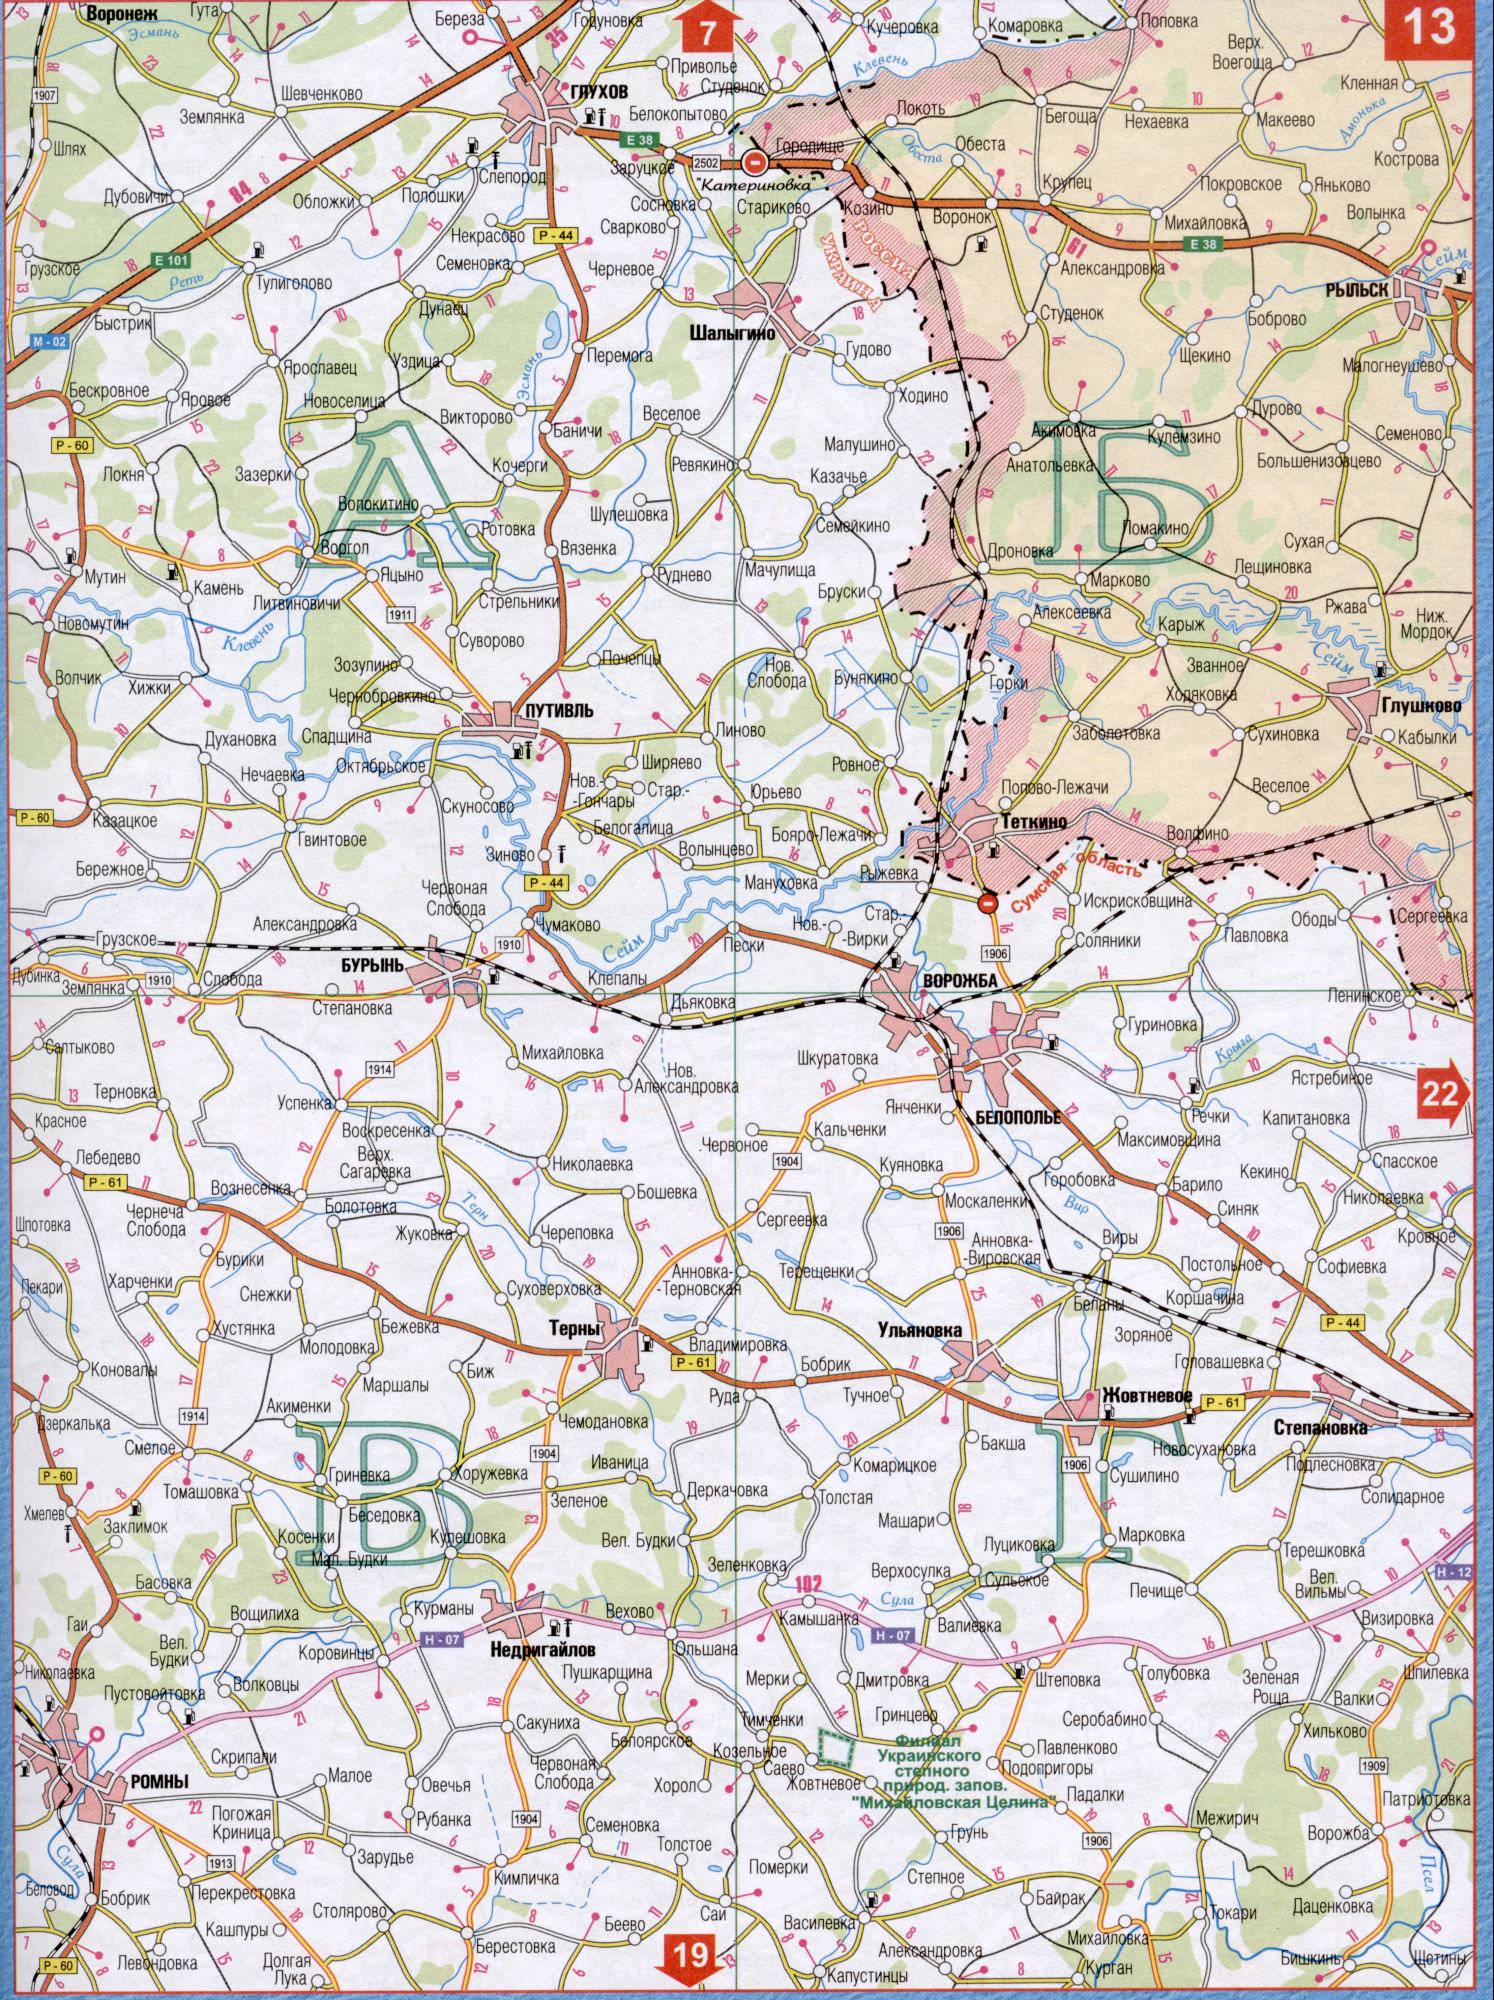 Map of Sumy region of Ukraine (regional center of Sumy). Download a detailed map of highways